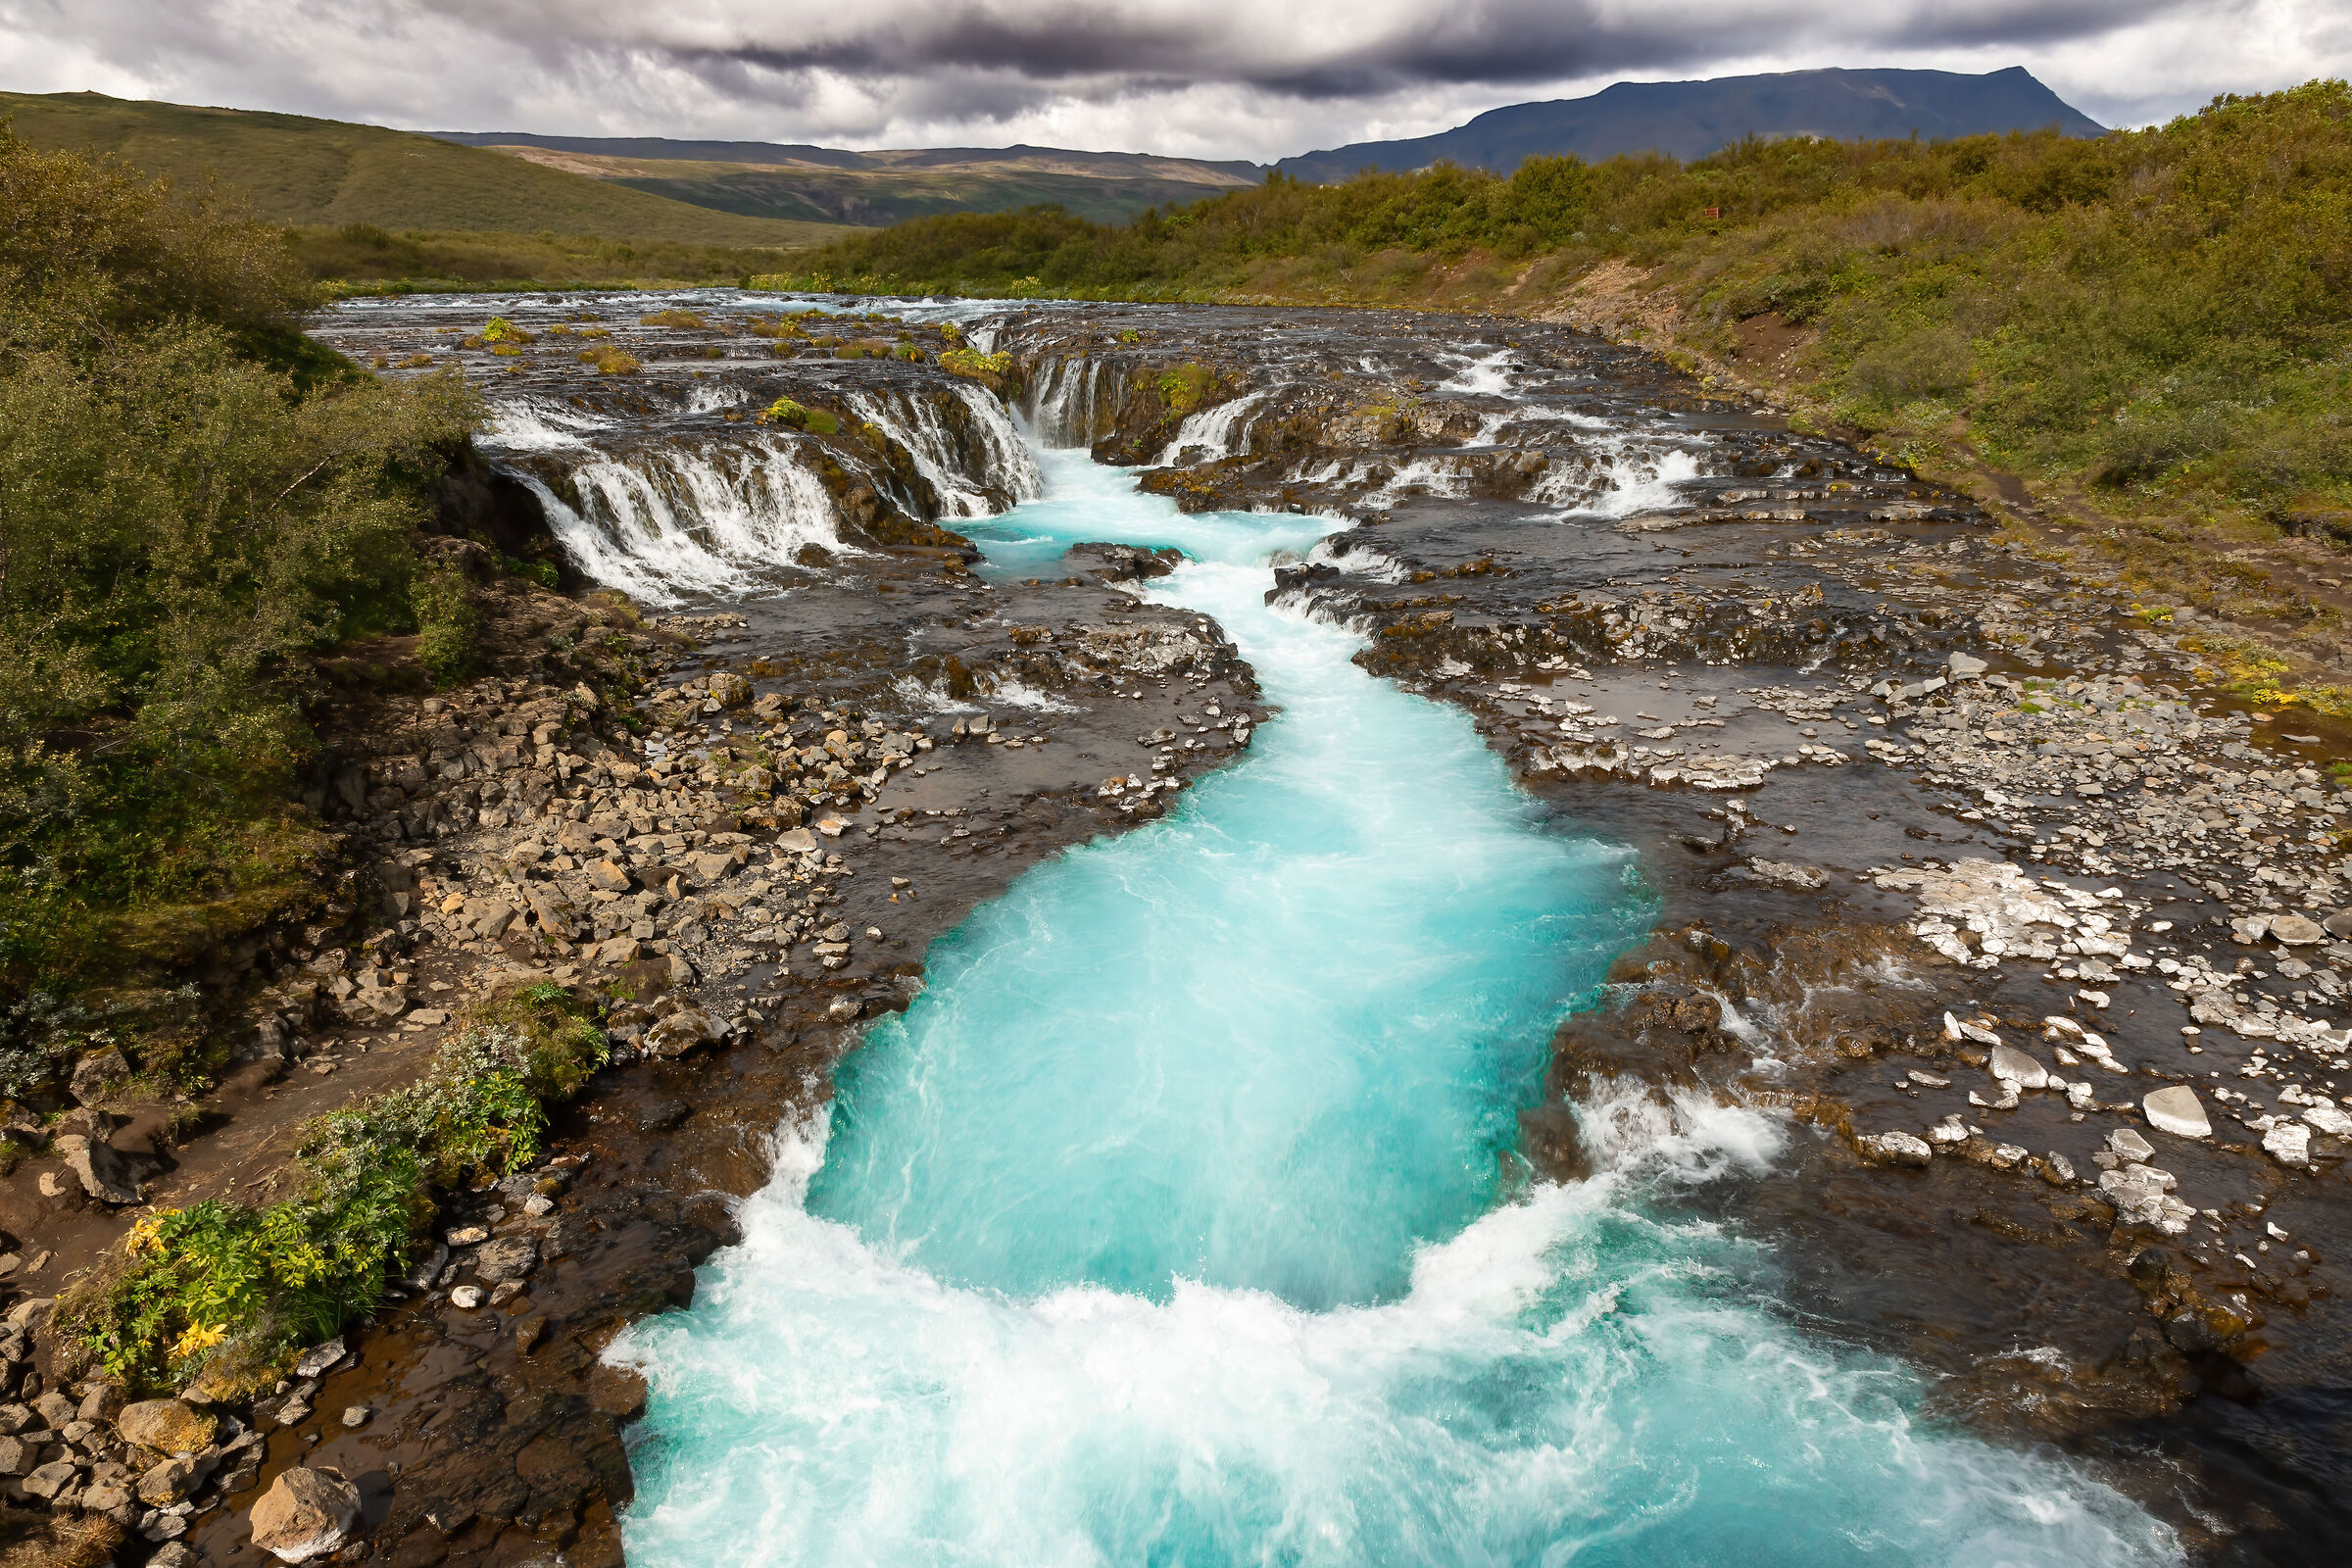 Bruarfoss and its turquoise waters...